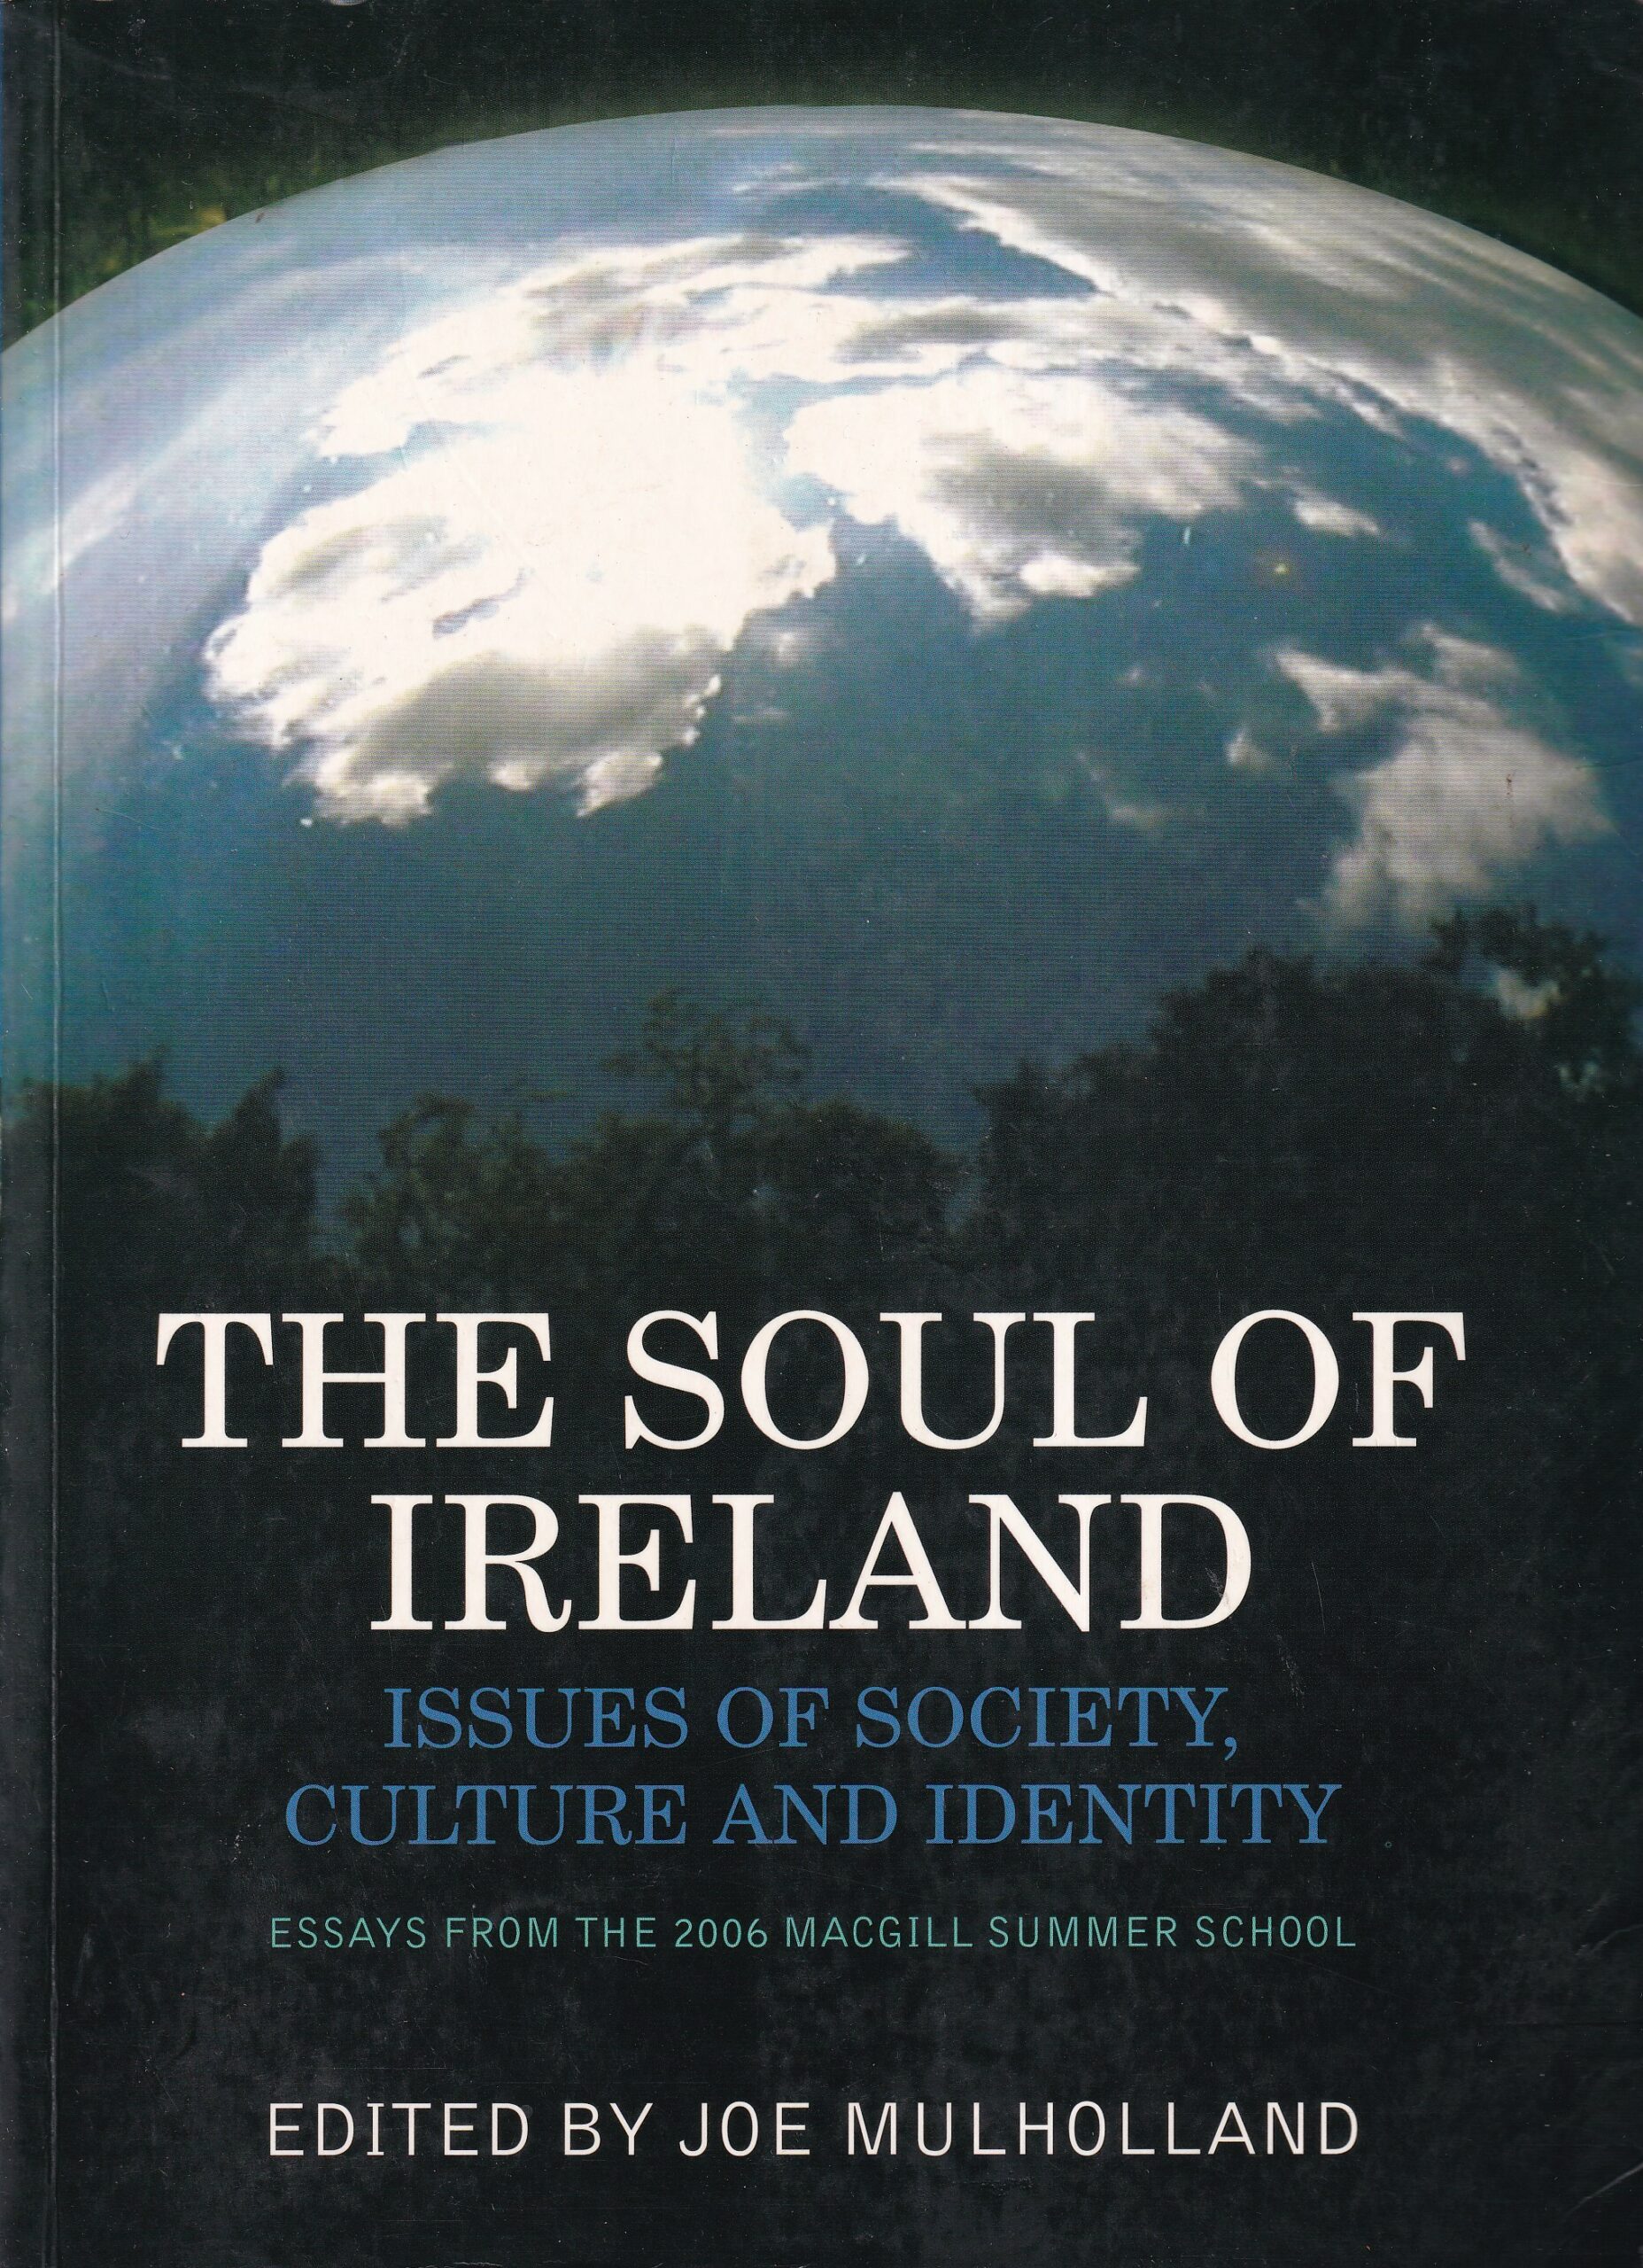 The Soul of Ireland: Issues of Society, Culture and Identity- Essays from the 2006 MacGill Summer School by Joe Mulholland (ed.)